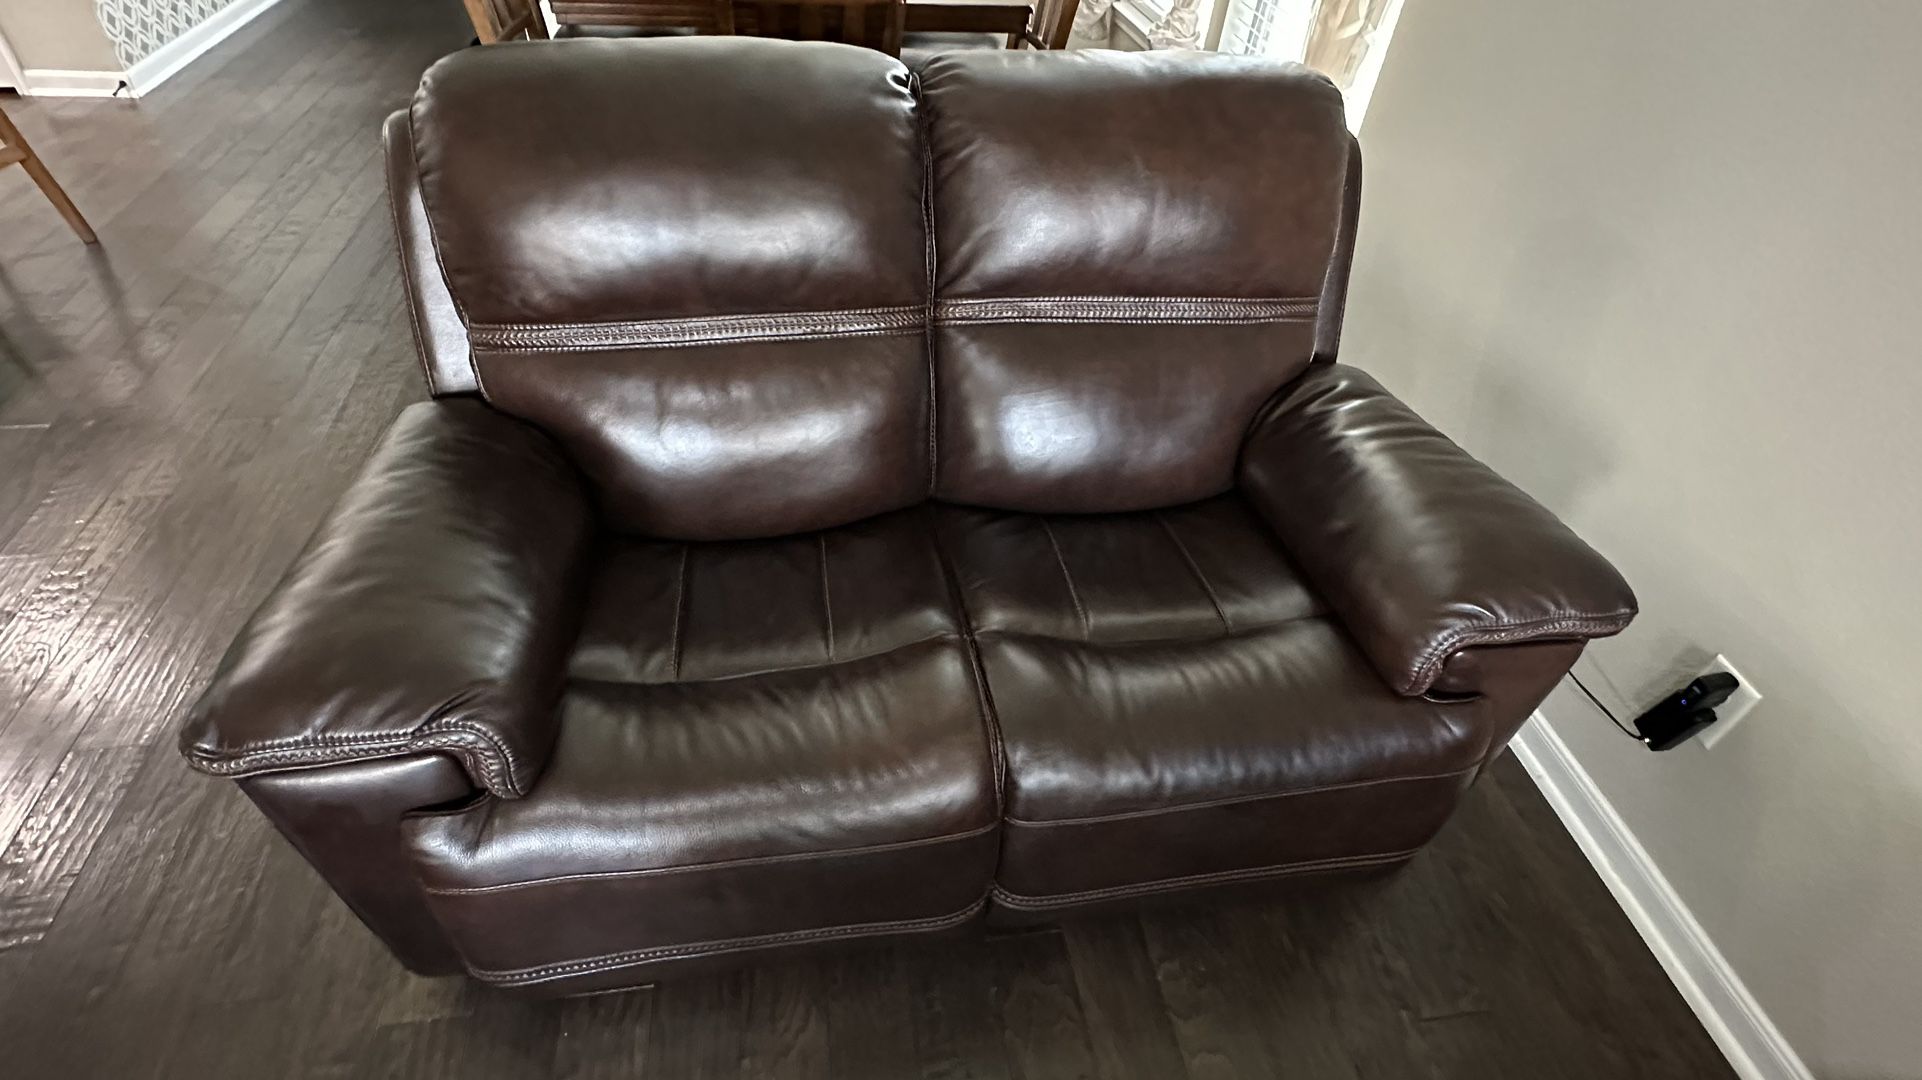 Leather couches from Gallery Furniture! Real Leather. If you know know GF you know the quality.